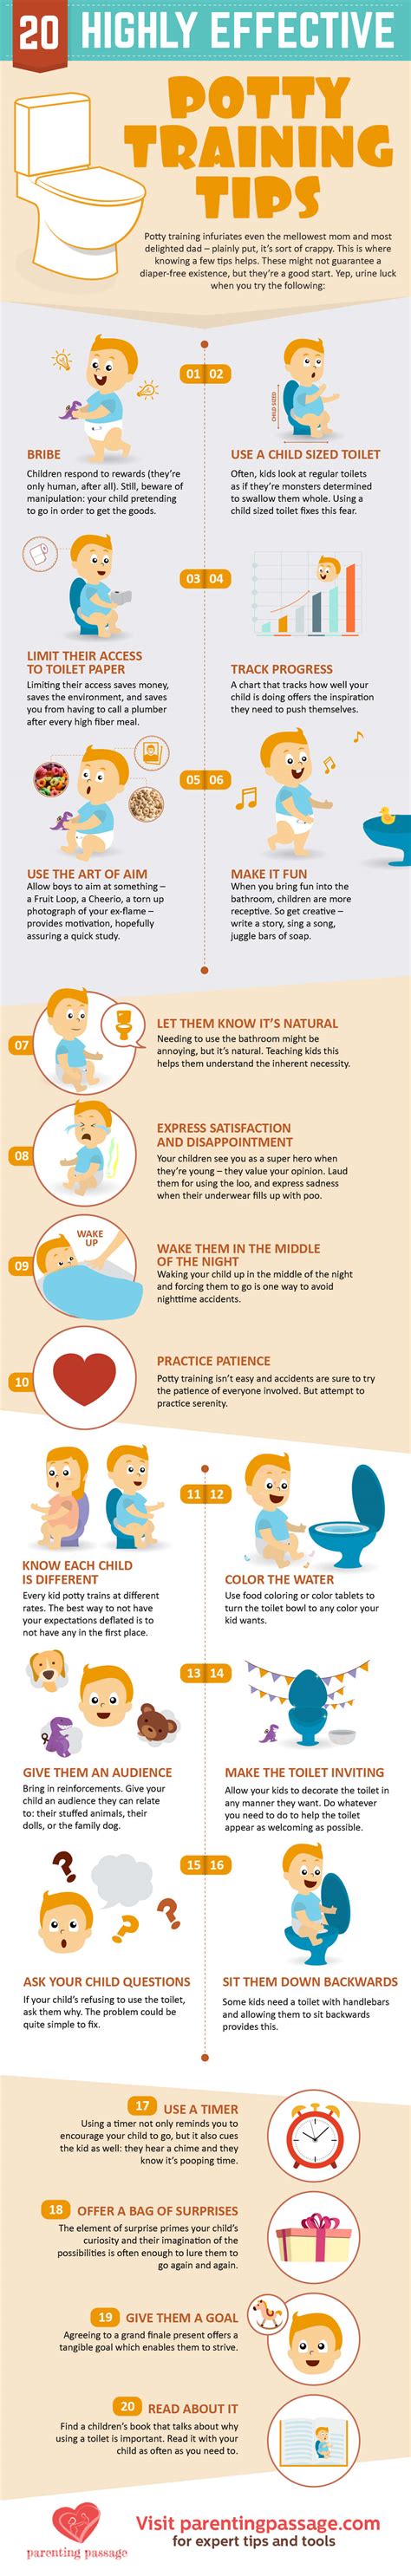 20 Highly Effective Potty Training Tips